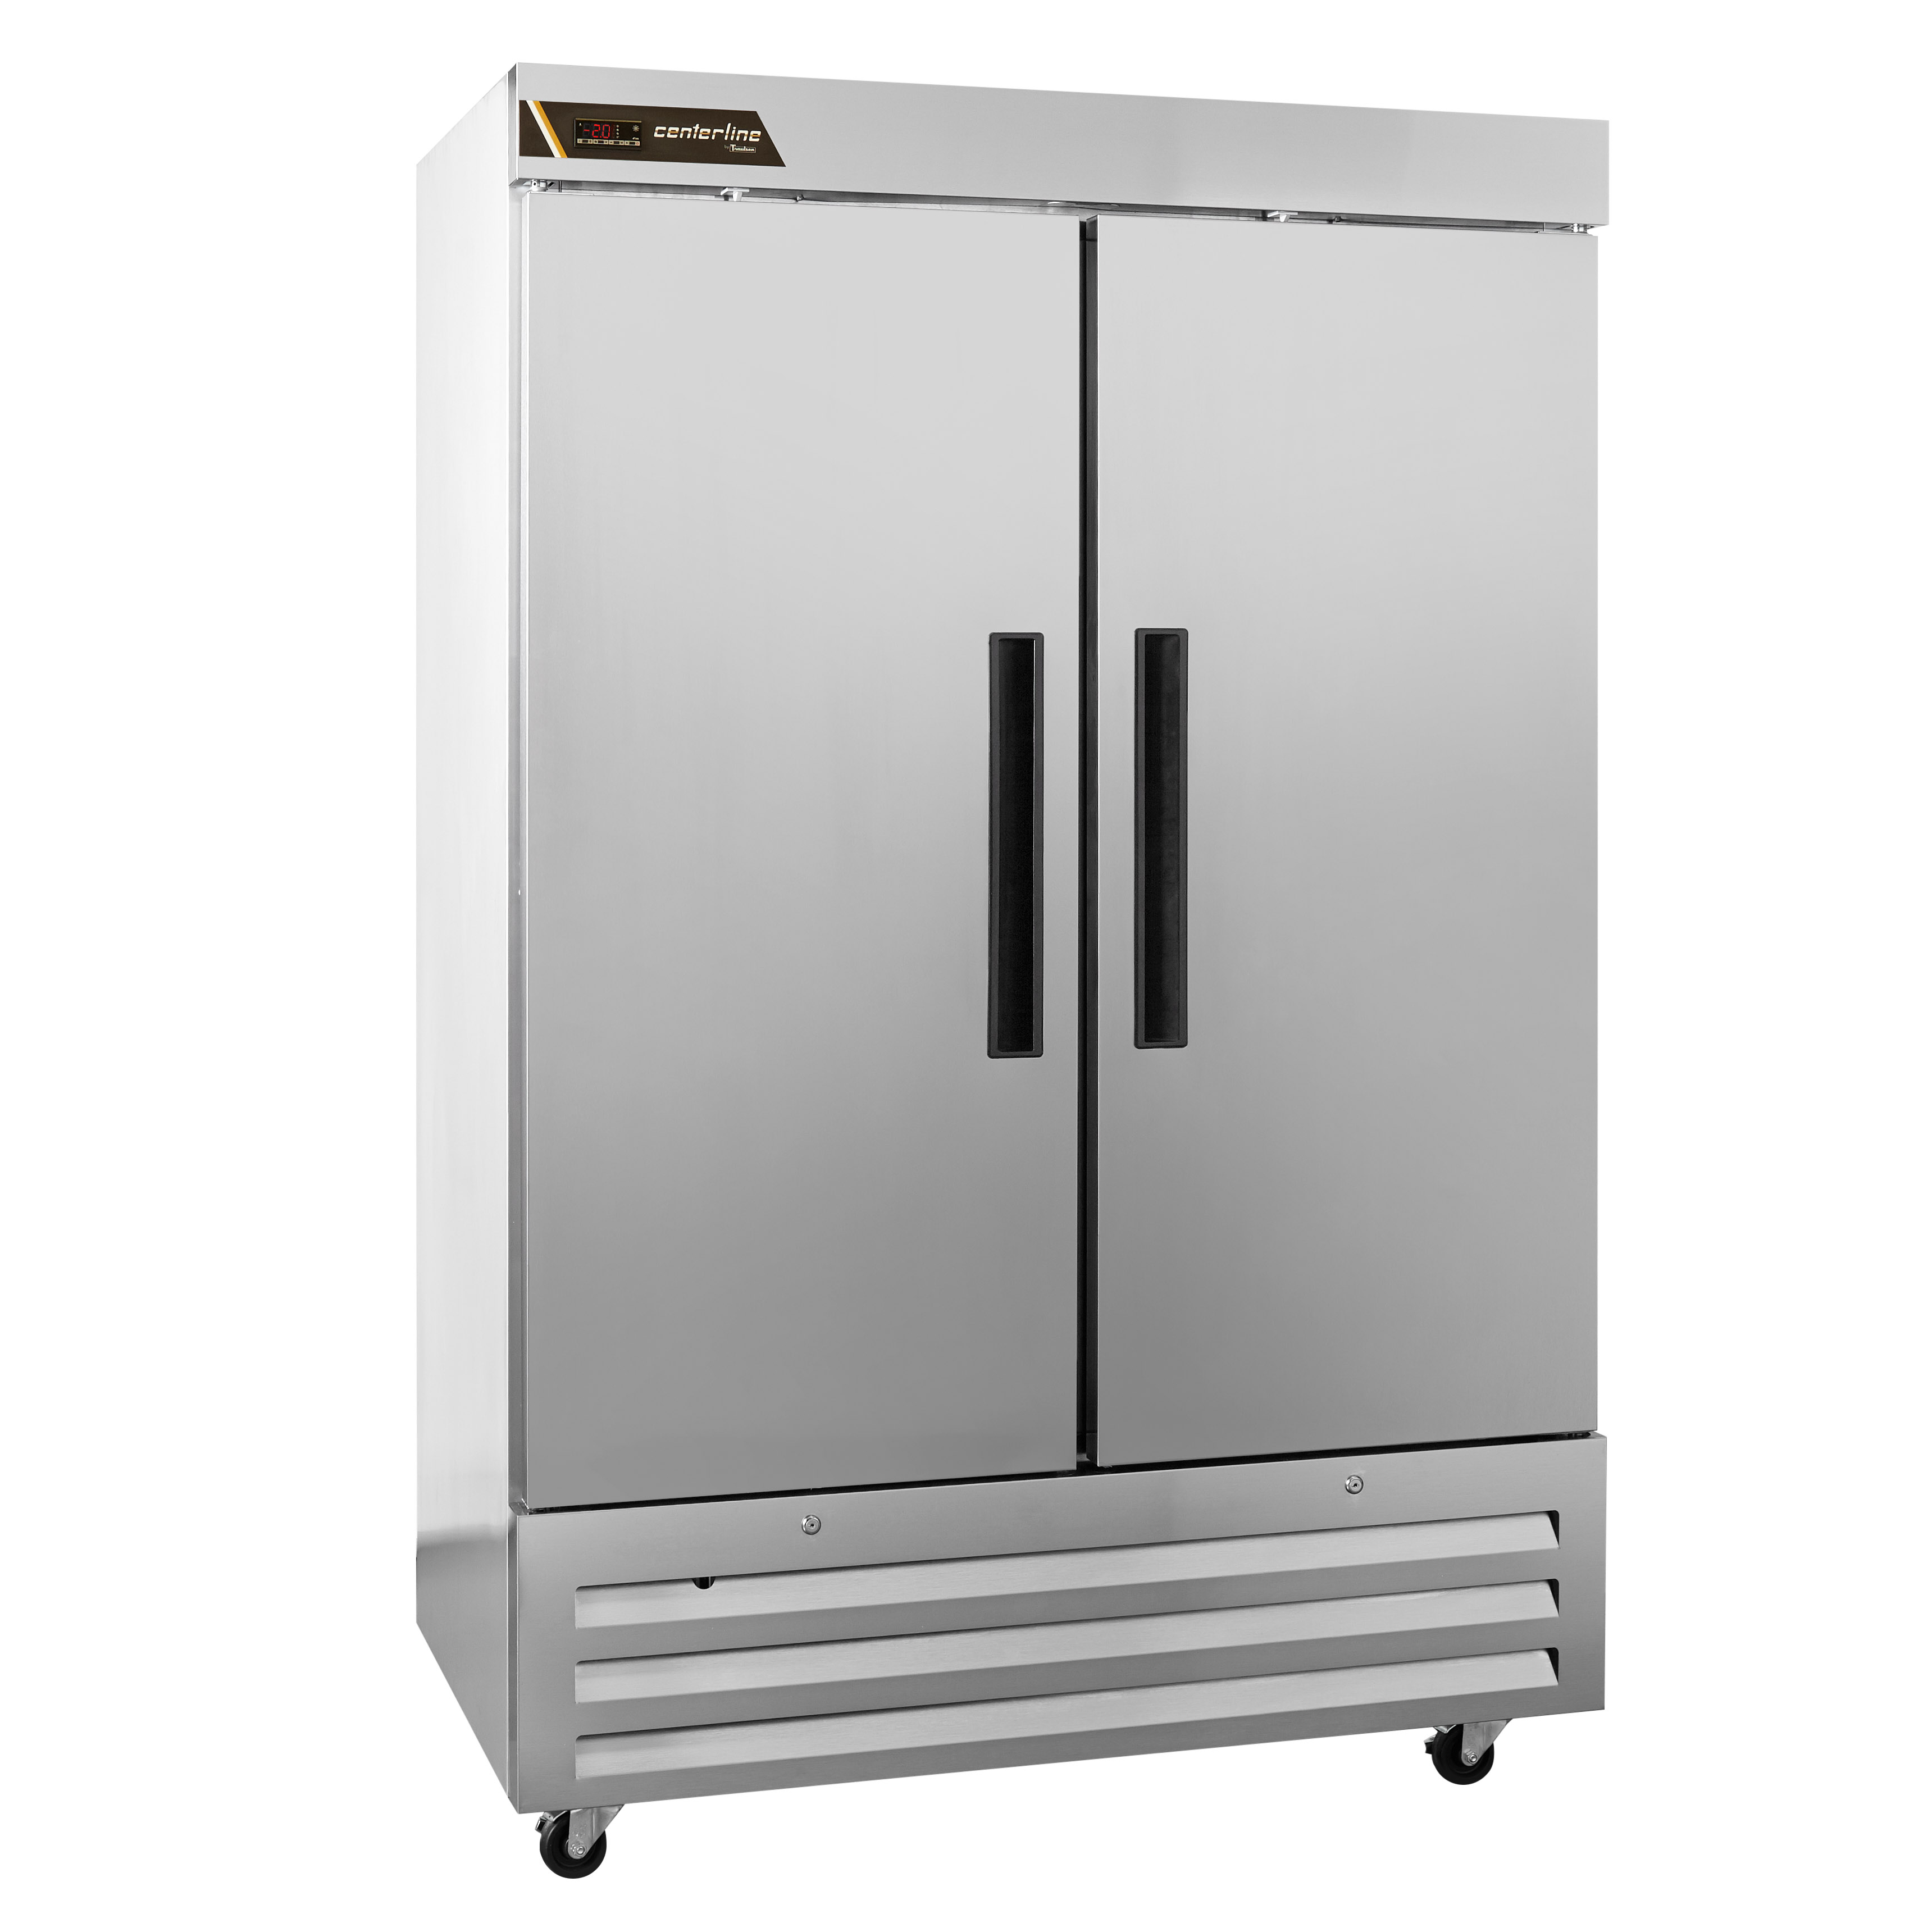 Centerline by Traulsen CLBM-49F-FS-RR 2-Section 2-Right Hinged Solid Door Reach-In Freezer